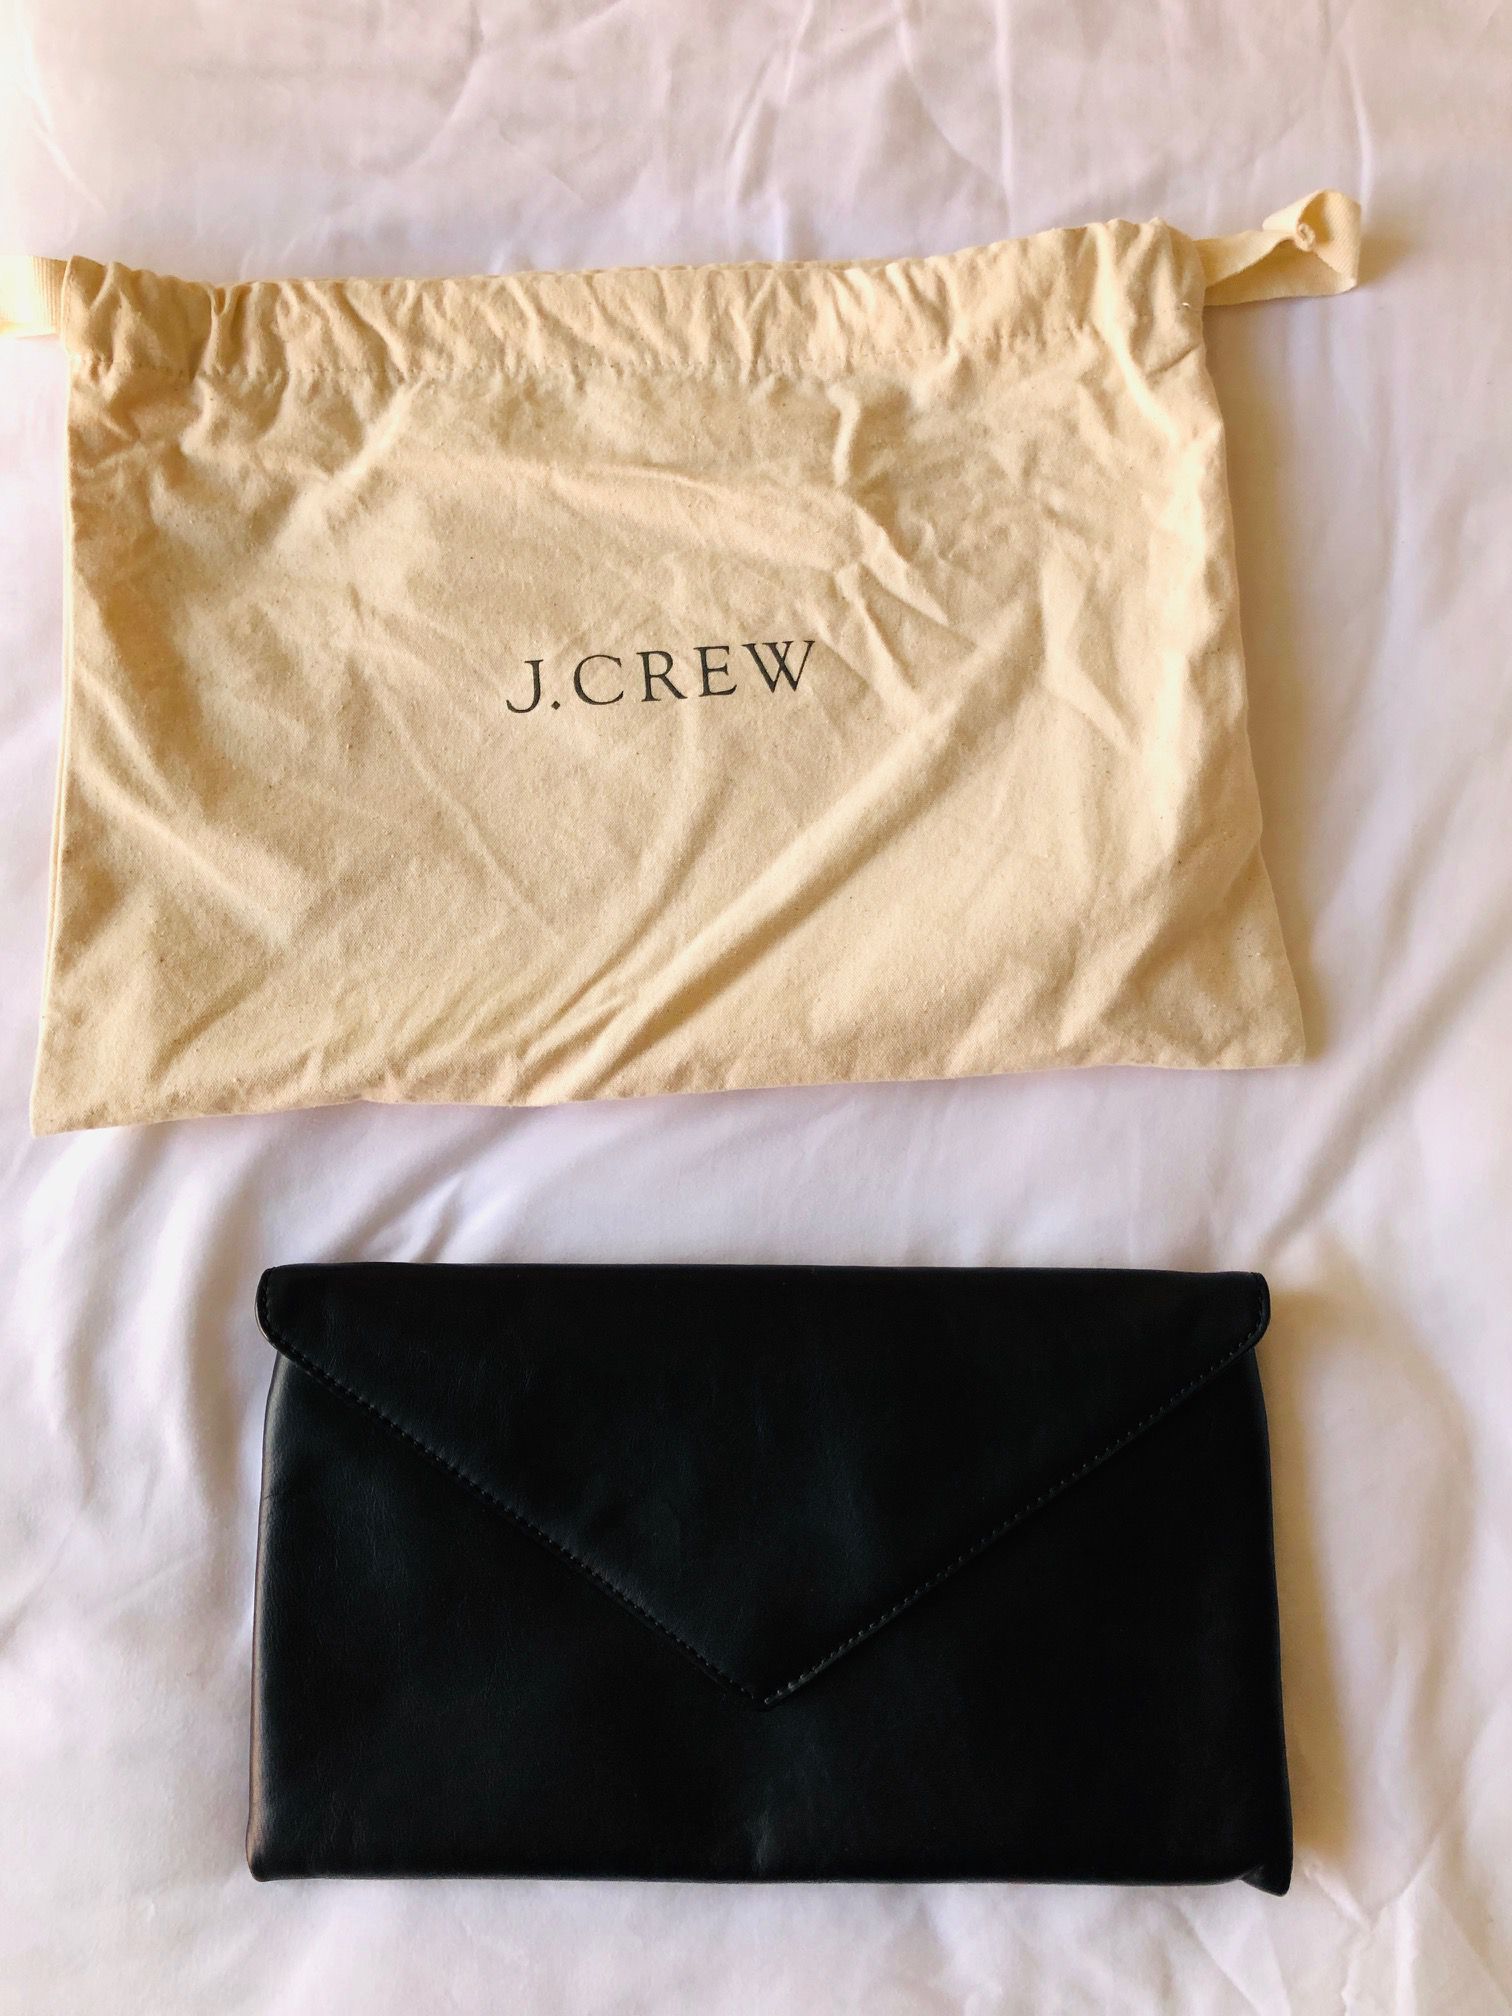 NEW with Tags: J Crew Black Leather Clutch with Dust Bag